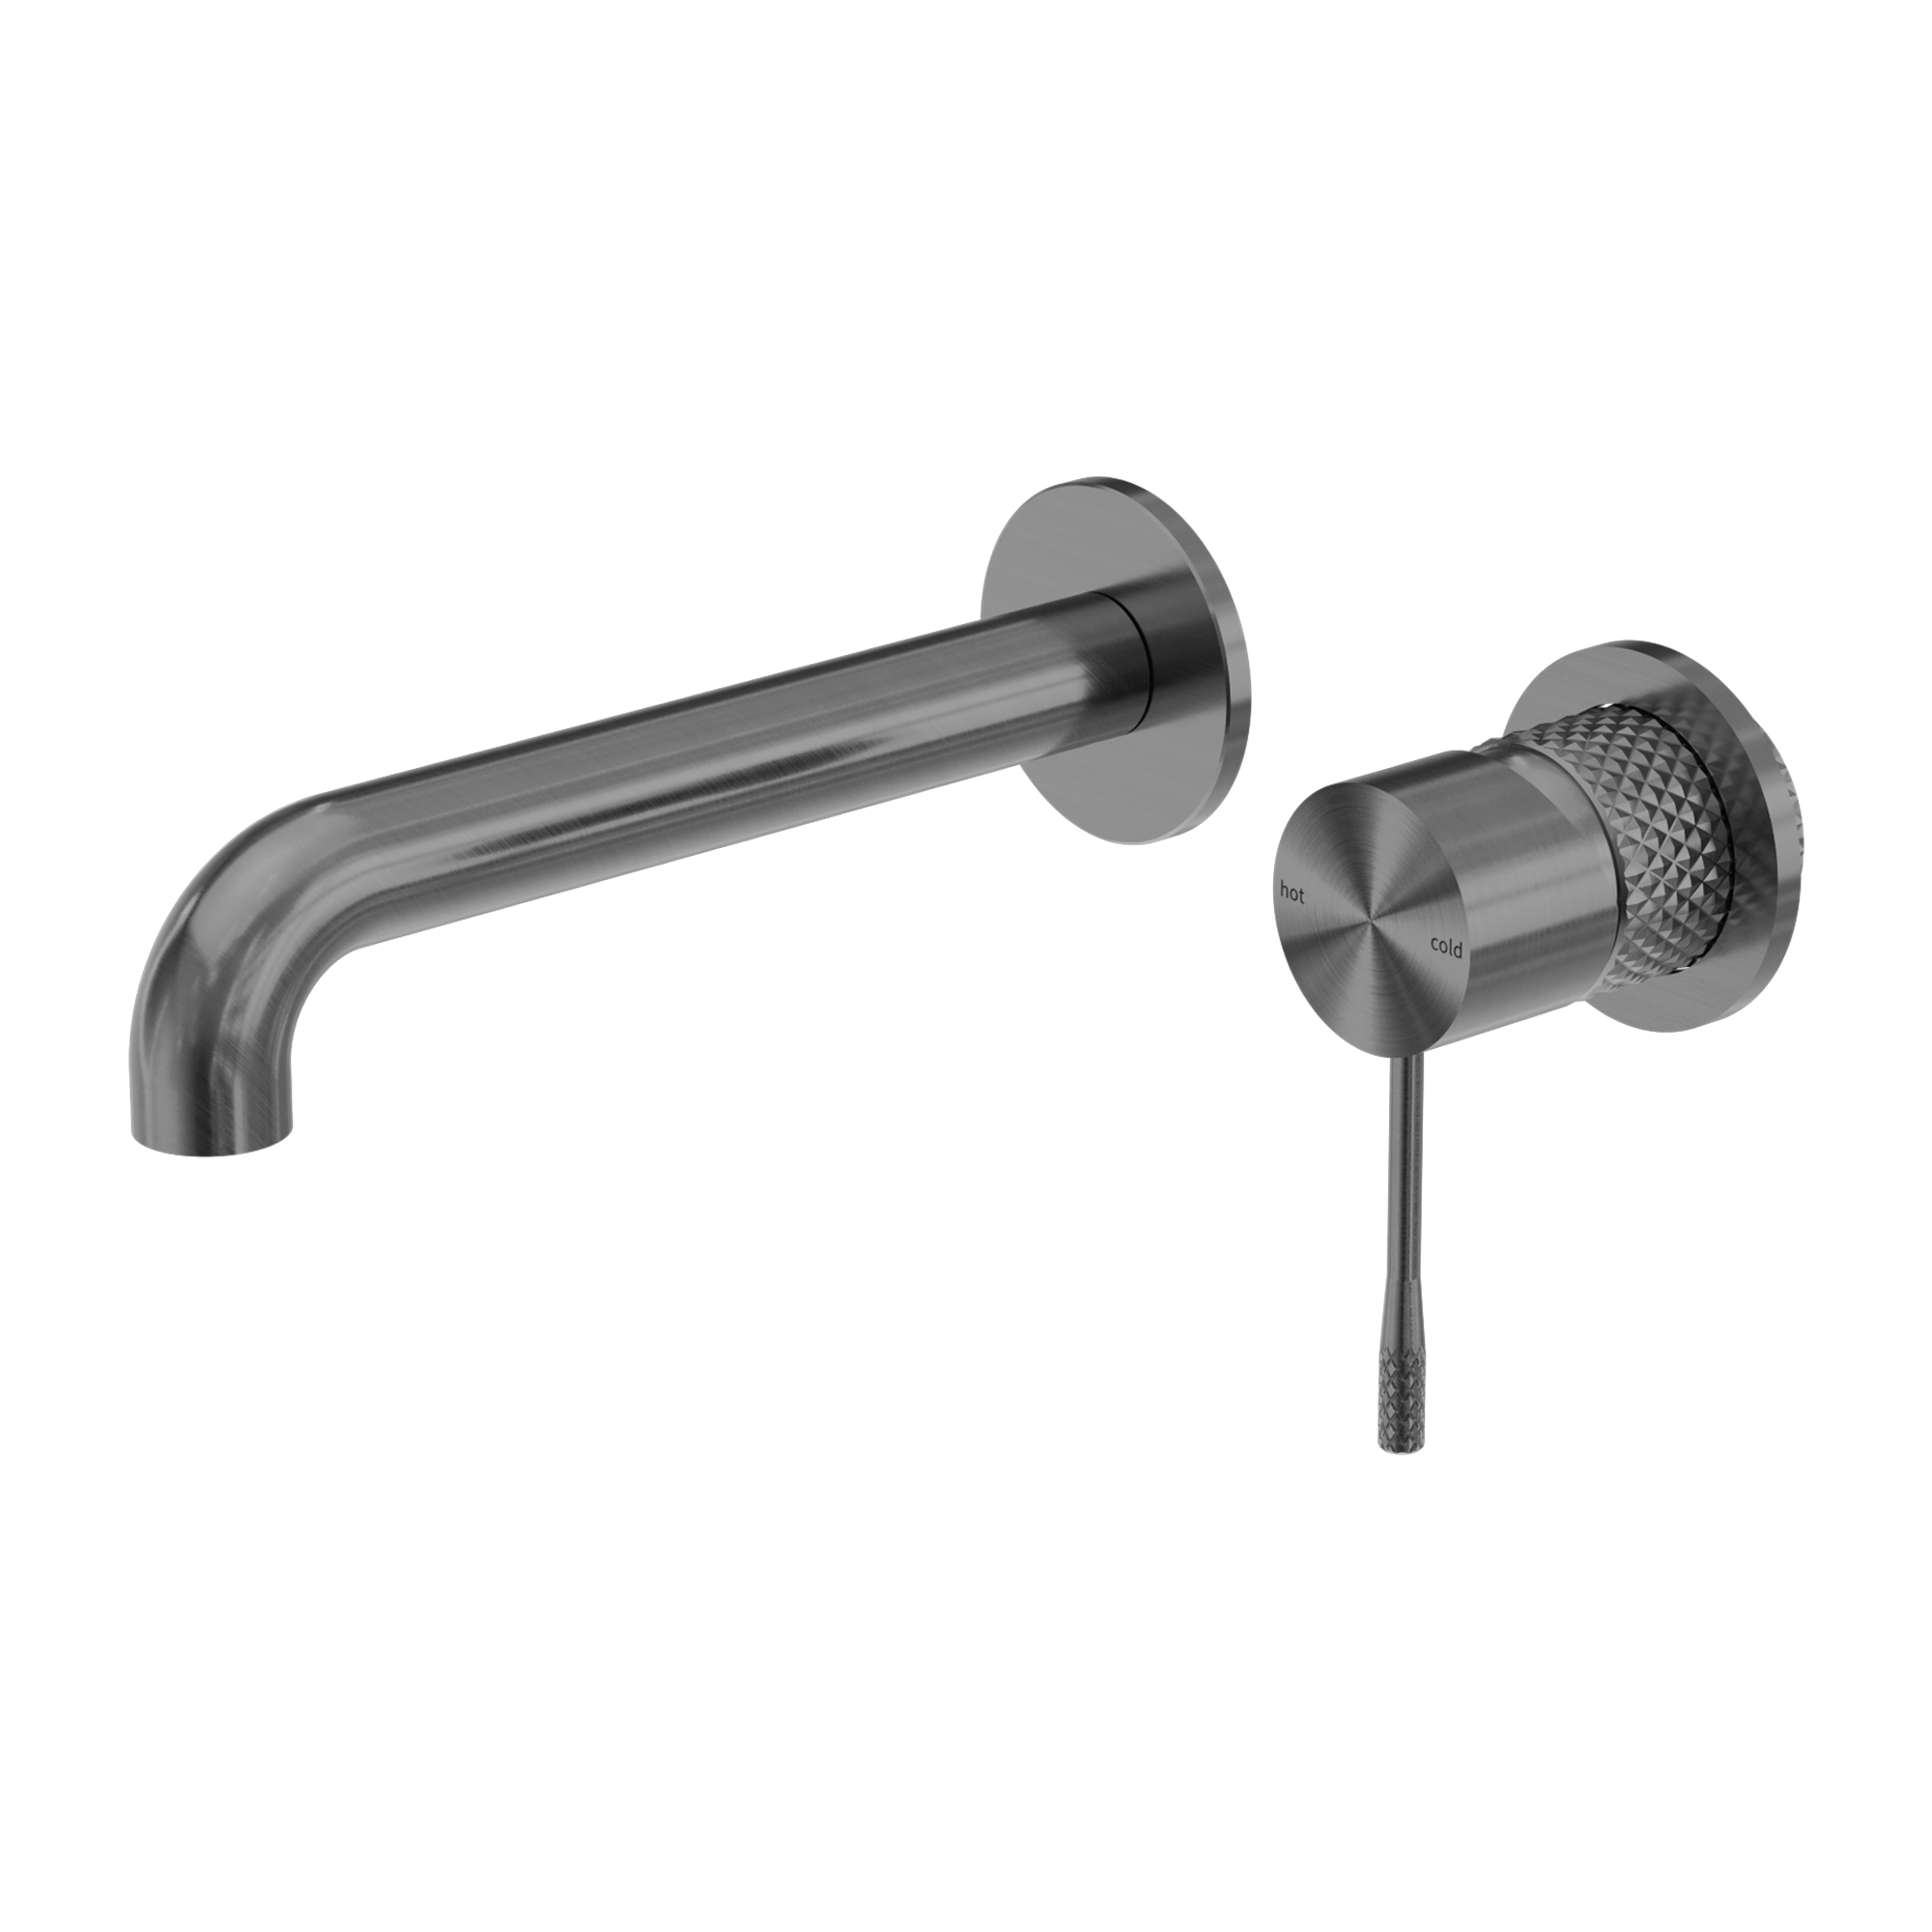 NERO OPAL WALL BASIN/ BATH MIXER SEPARATE BACK PLATE GRAPHITE (AVAILABLE IN 120MM, 160MM, 185MM, 230MM AND 260MM)